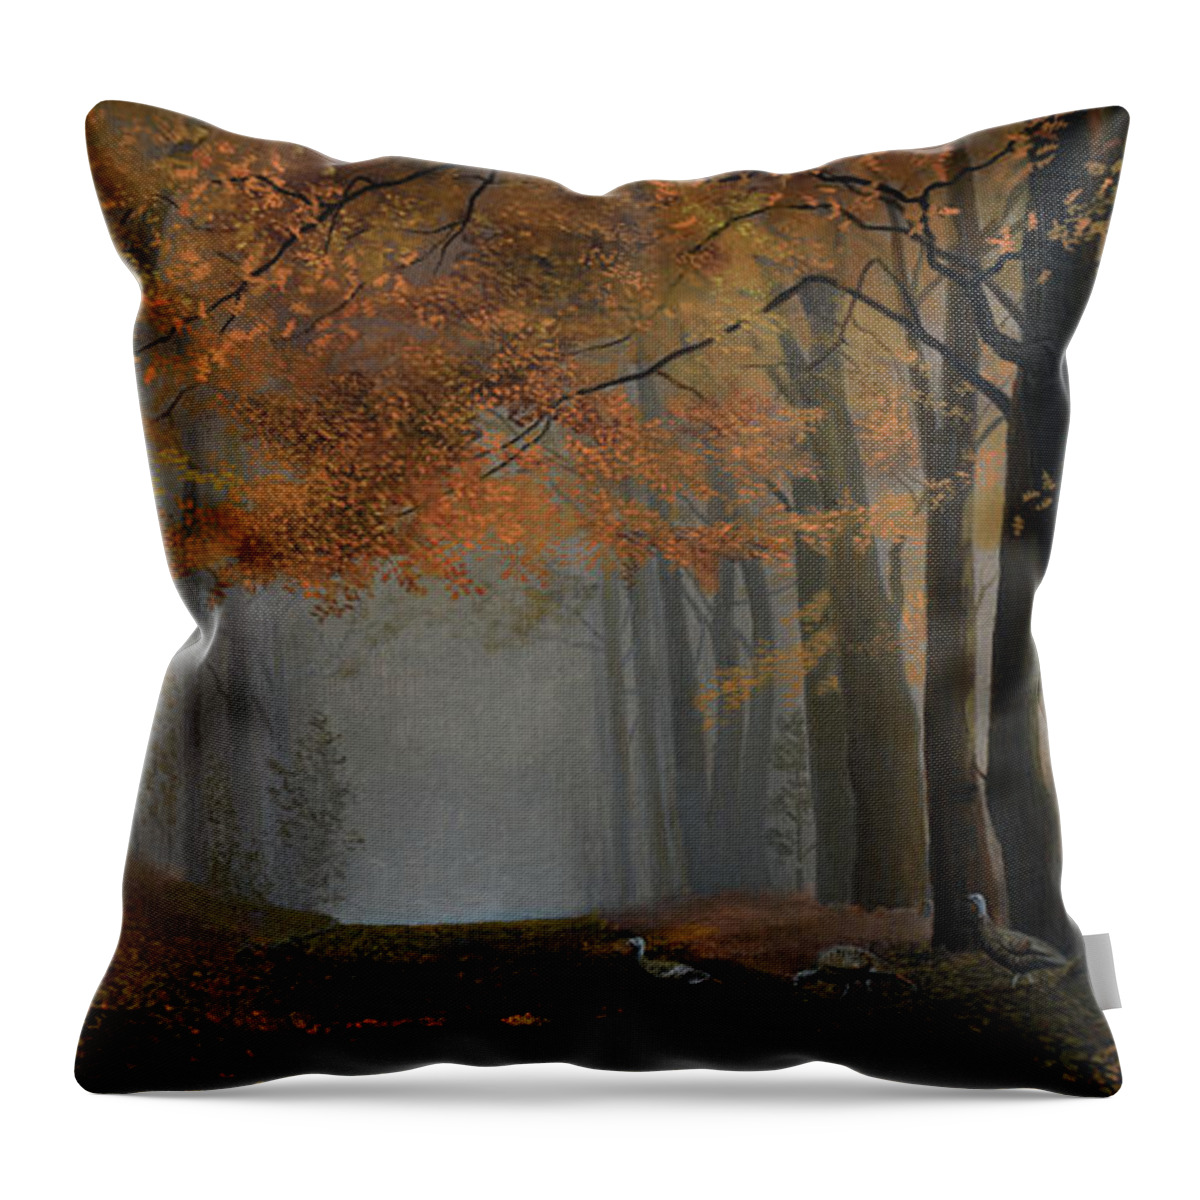 Turkey Throw Pillow featuring the painting Road to Grousehaven by Charles Owens